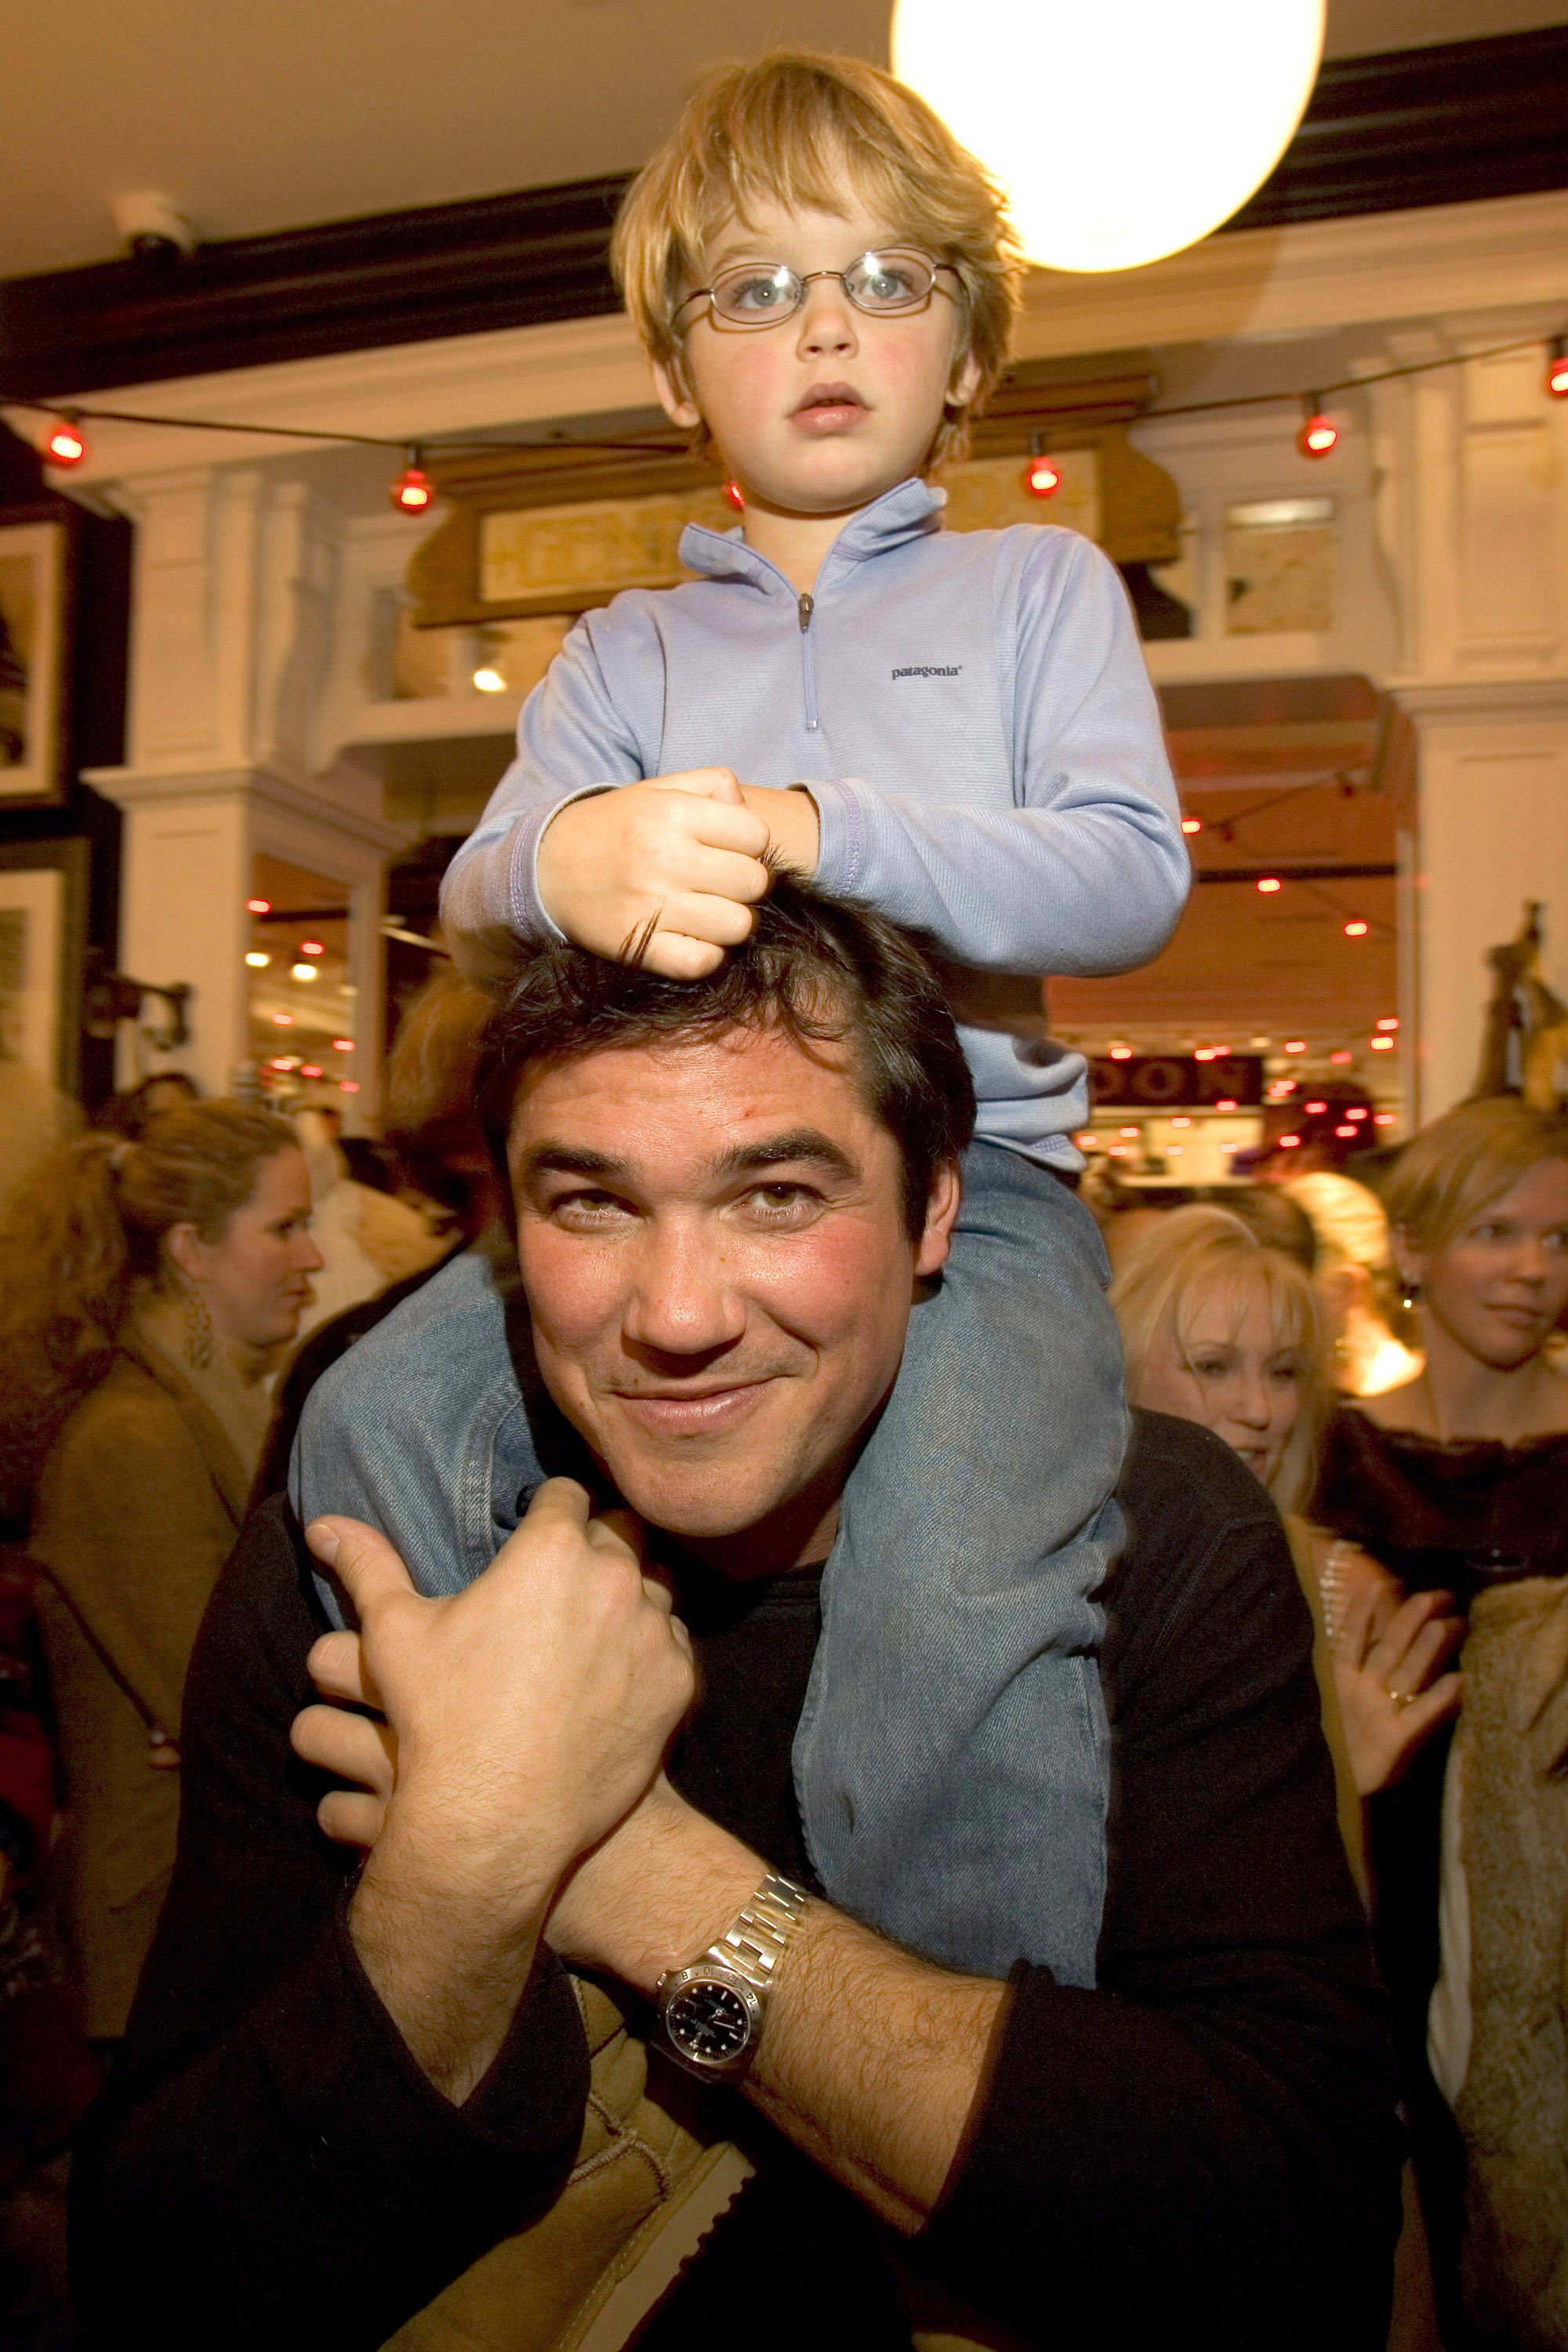 Christopher and Dean Cain during Aspen Peak at the Opening of The New Ralph Lauren Aspen Store in Aspen, Colorado, on December 30, 2004 | Source: Getty Images